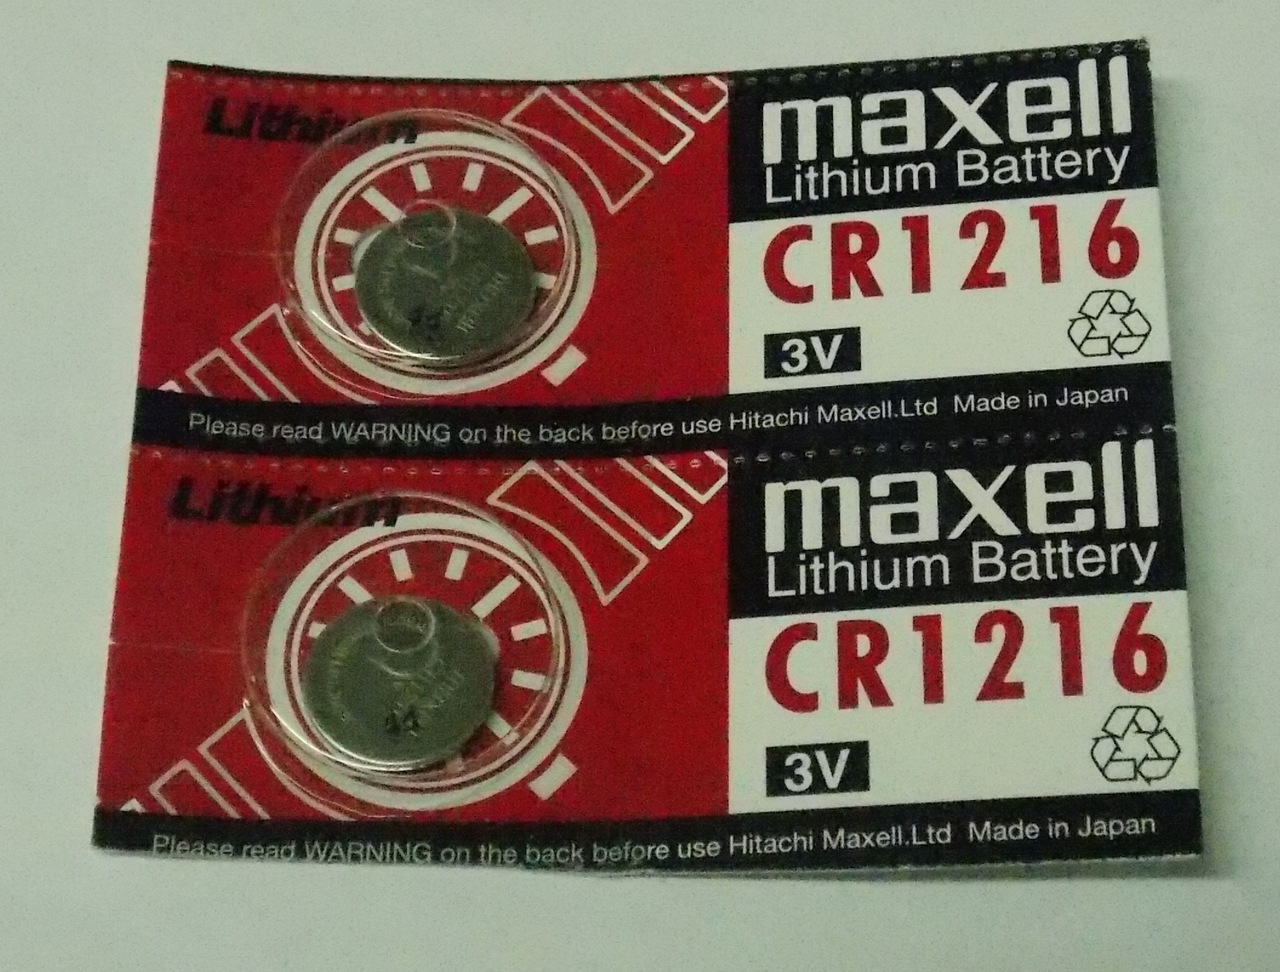 Maxell CR1216 3 Volt Lithium Coin Battery - 2 Pack + FREE SHIPPING